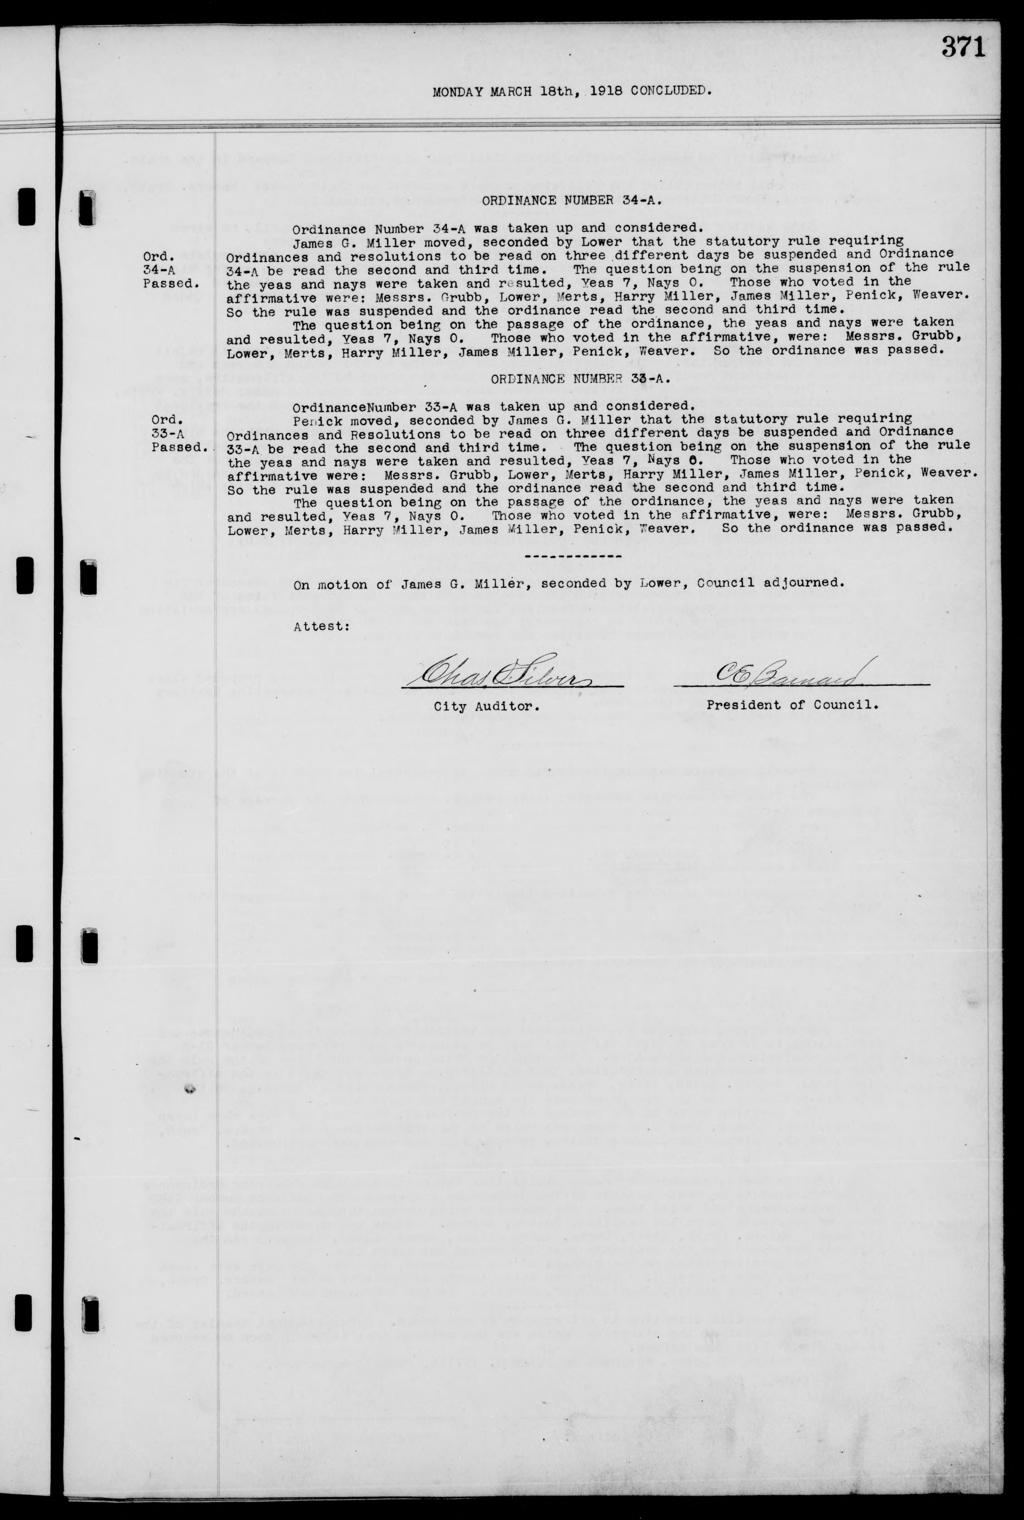 371 MONDAY MARCH 18th, 1918 CONCLUDED. ORDINANCE NUMBER 34-A. Ordinance Number 34-A was taken up and considered. James G. Miller moved, seconded by Lower that the statutory rule requiring Ord.